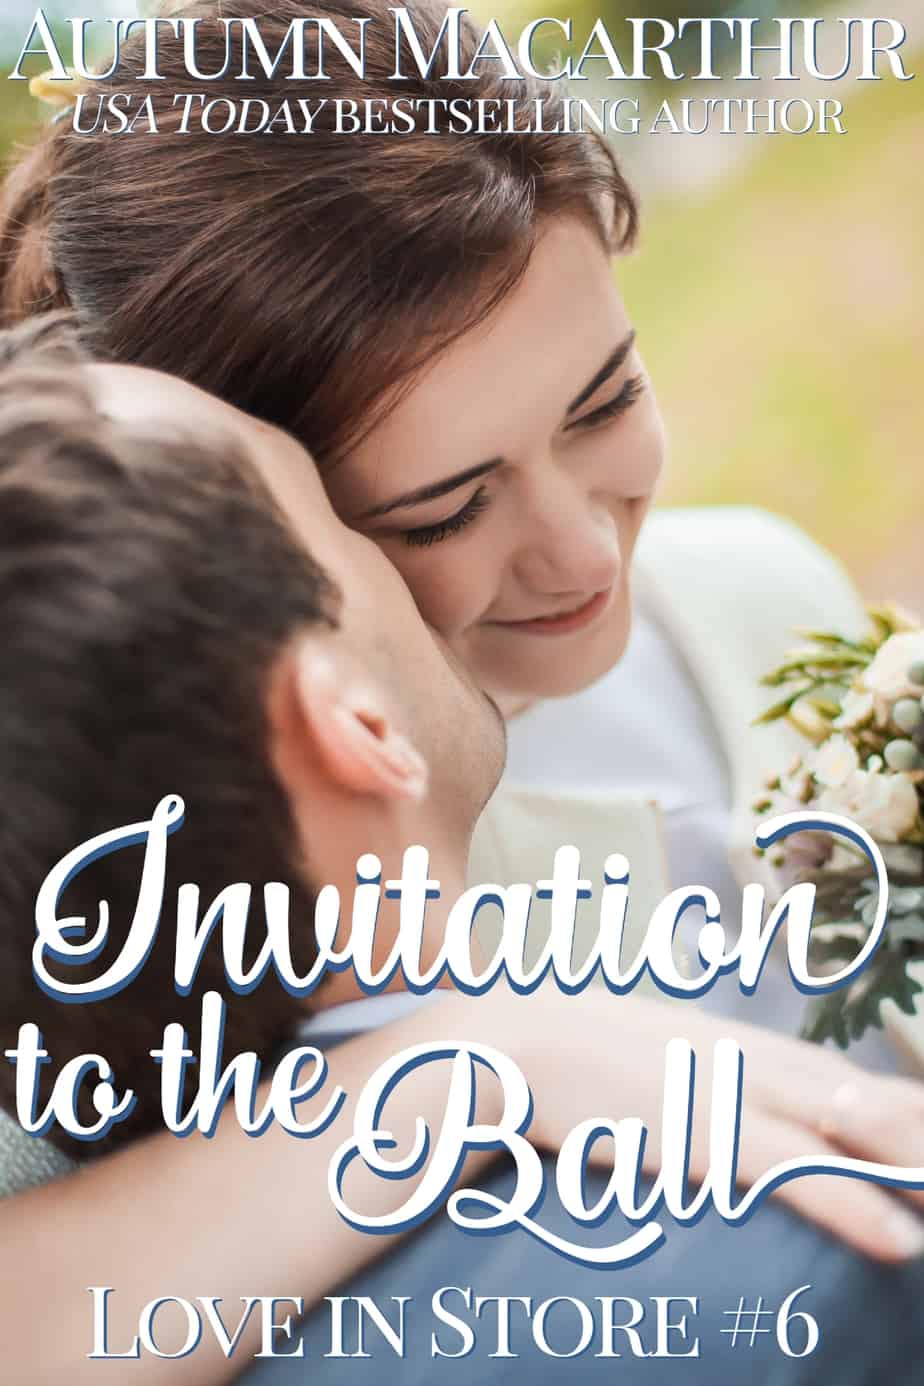 Cover image for Invitation to the Ball by Autumn Macarthur, a sweet shorter friendship-to-love Cinderella romance set in London.